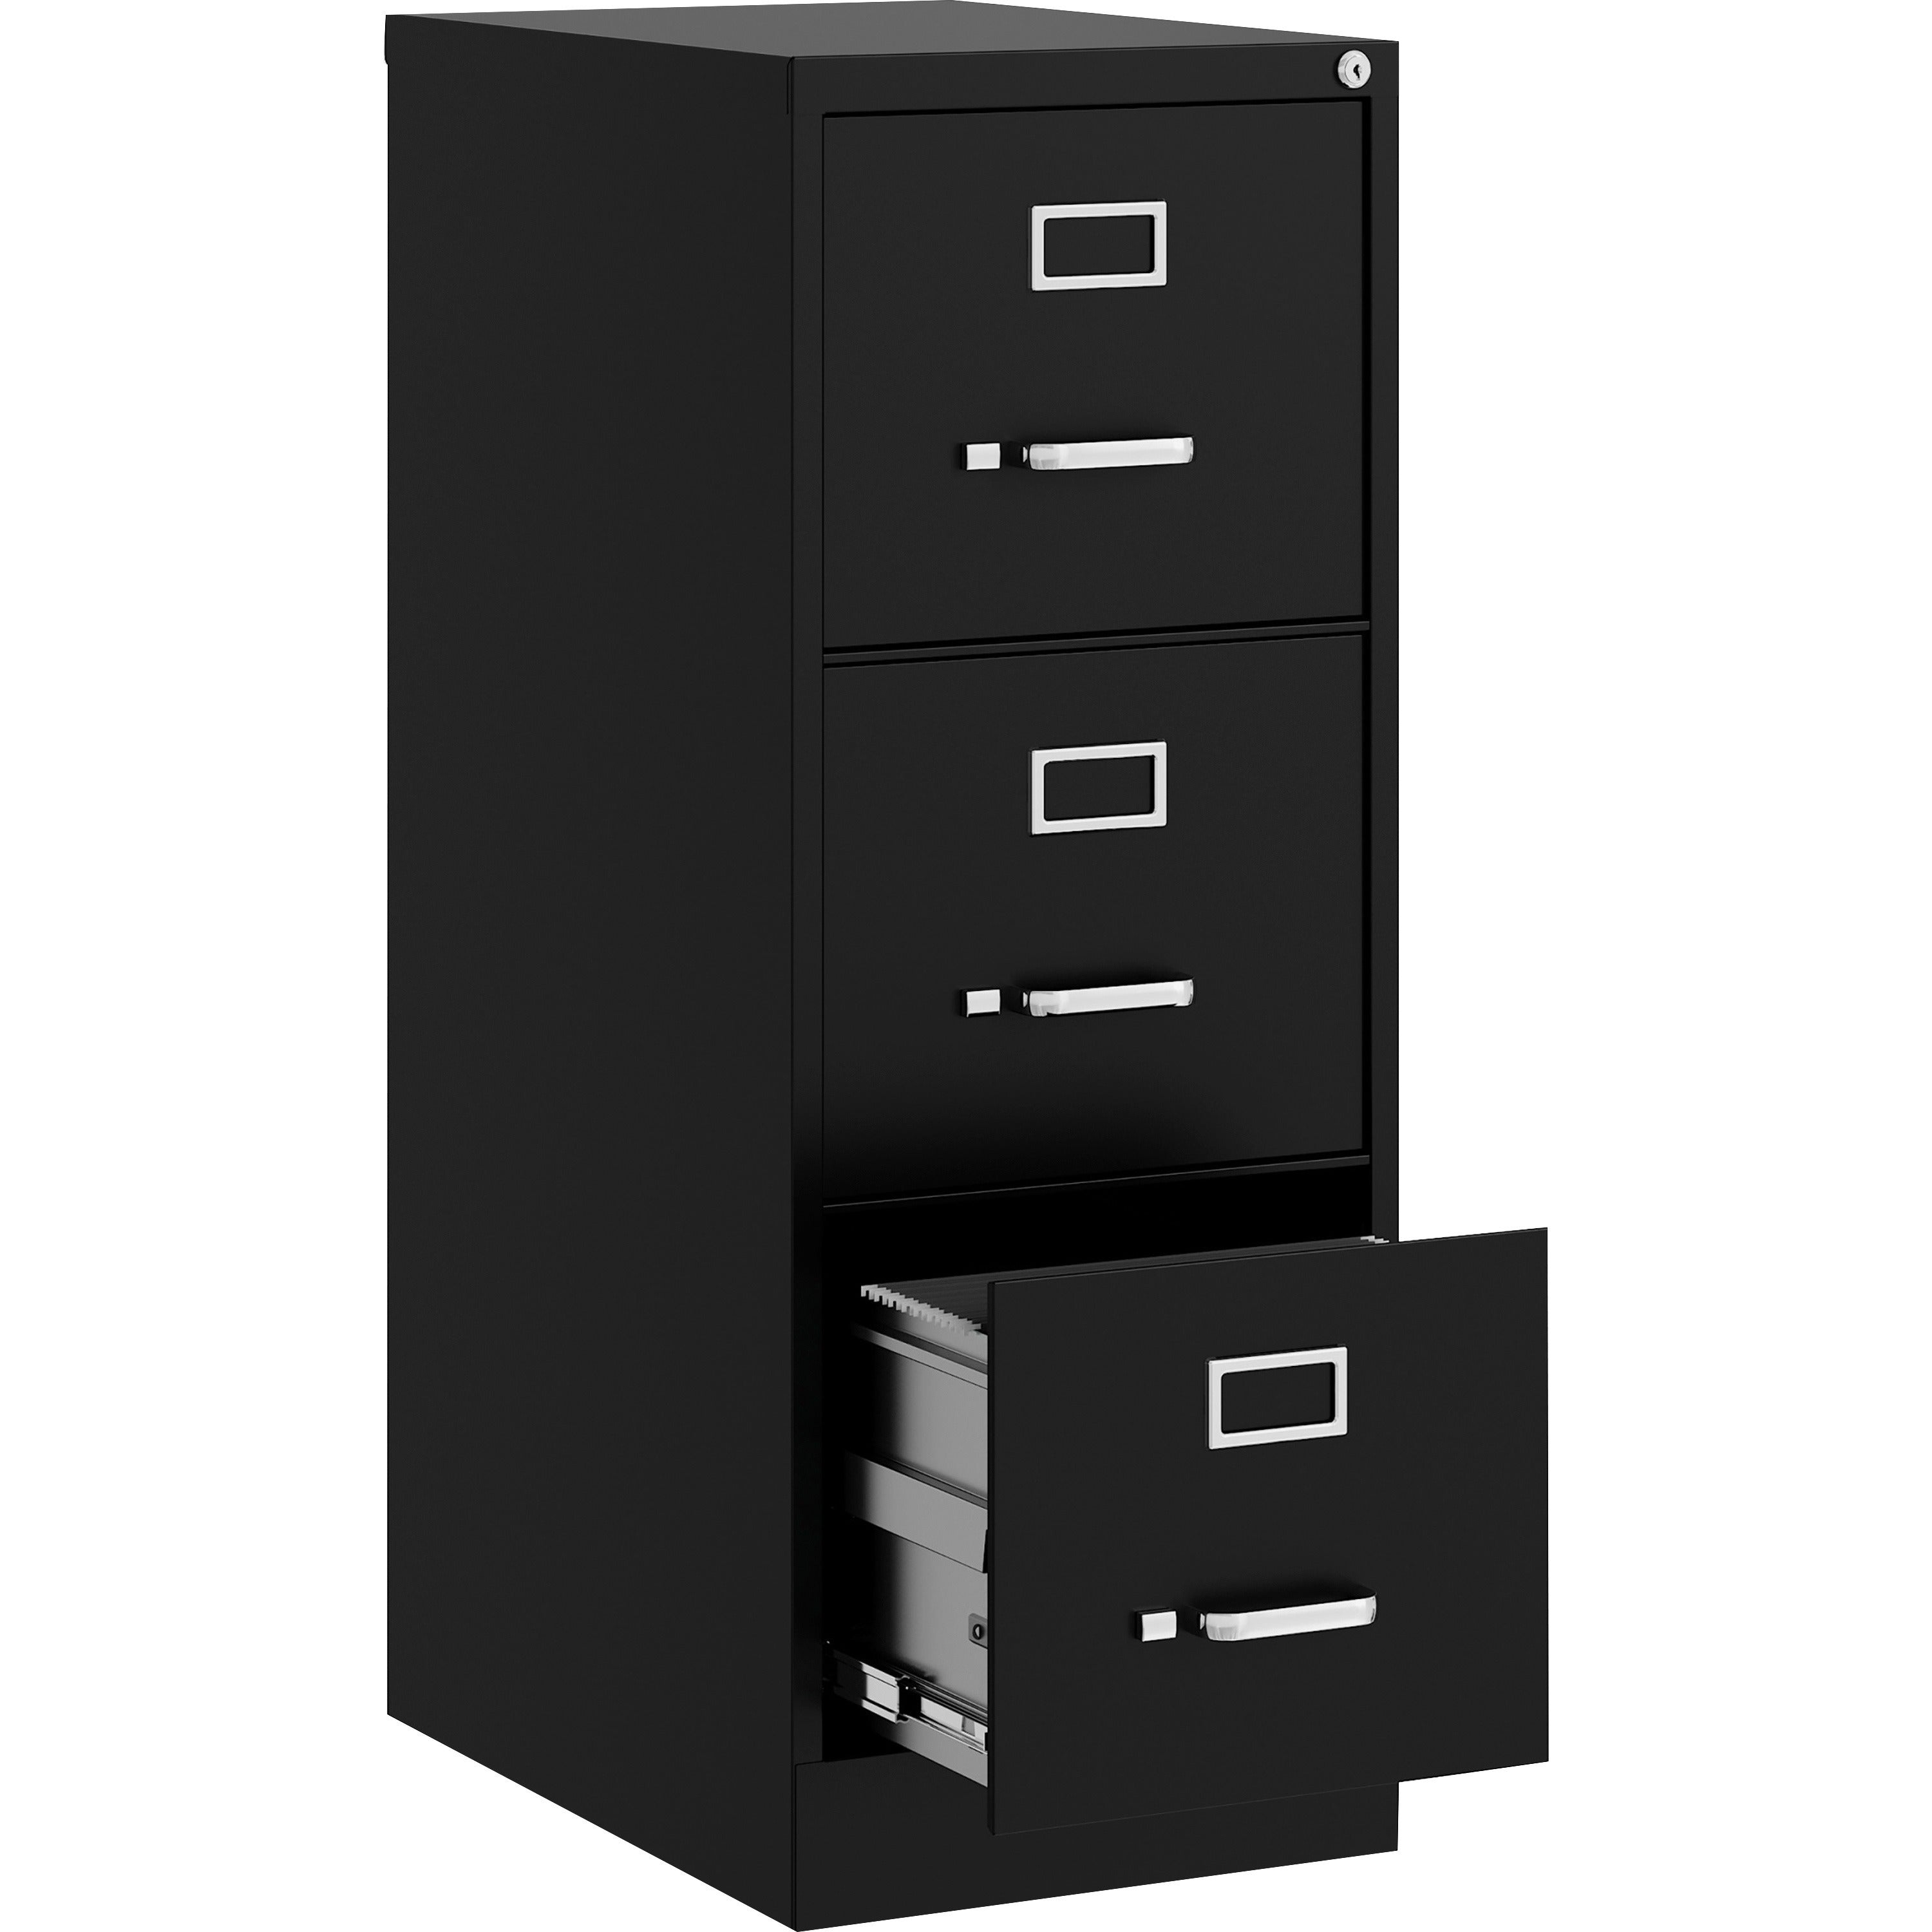 lorell-fortress-series-22-commercial-grade-vertical-file-cabinet-15-x-22-x-402-3-x-drawers-for-file-letter-vertical-ball-bearing-suspension-removable-lock-pull-handle-wire-management-black-steel-recycled_llr42297 - 4